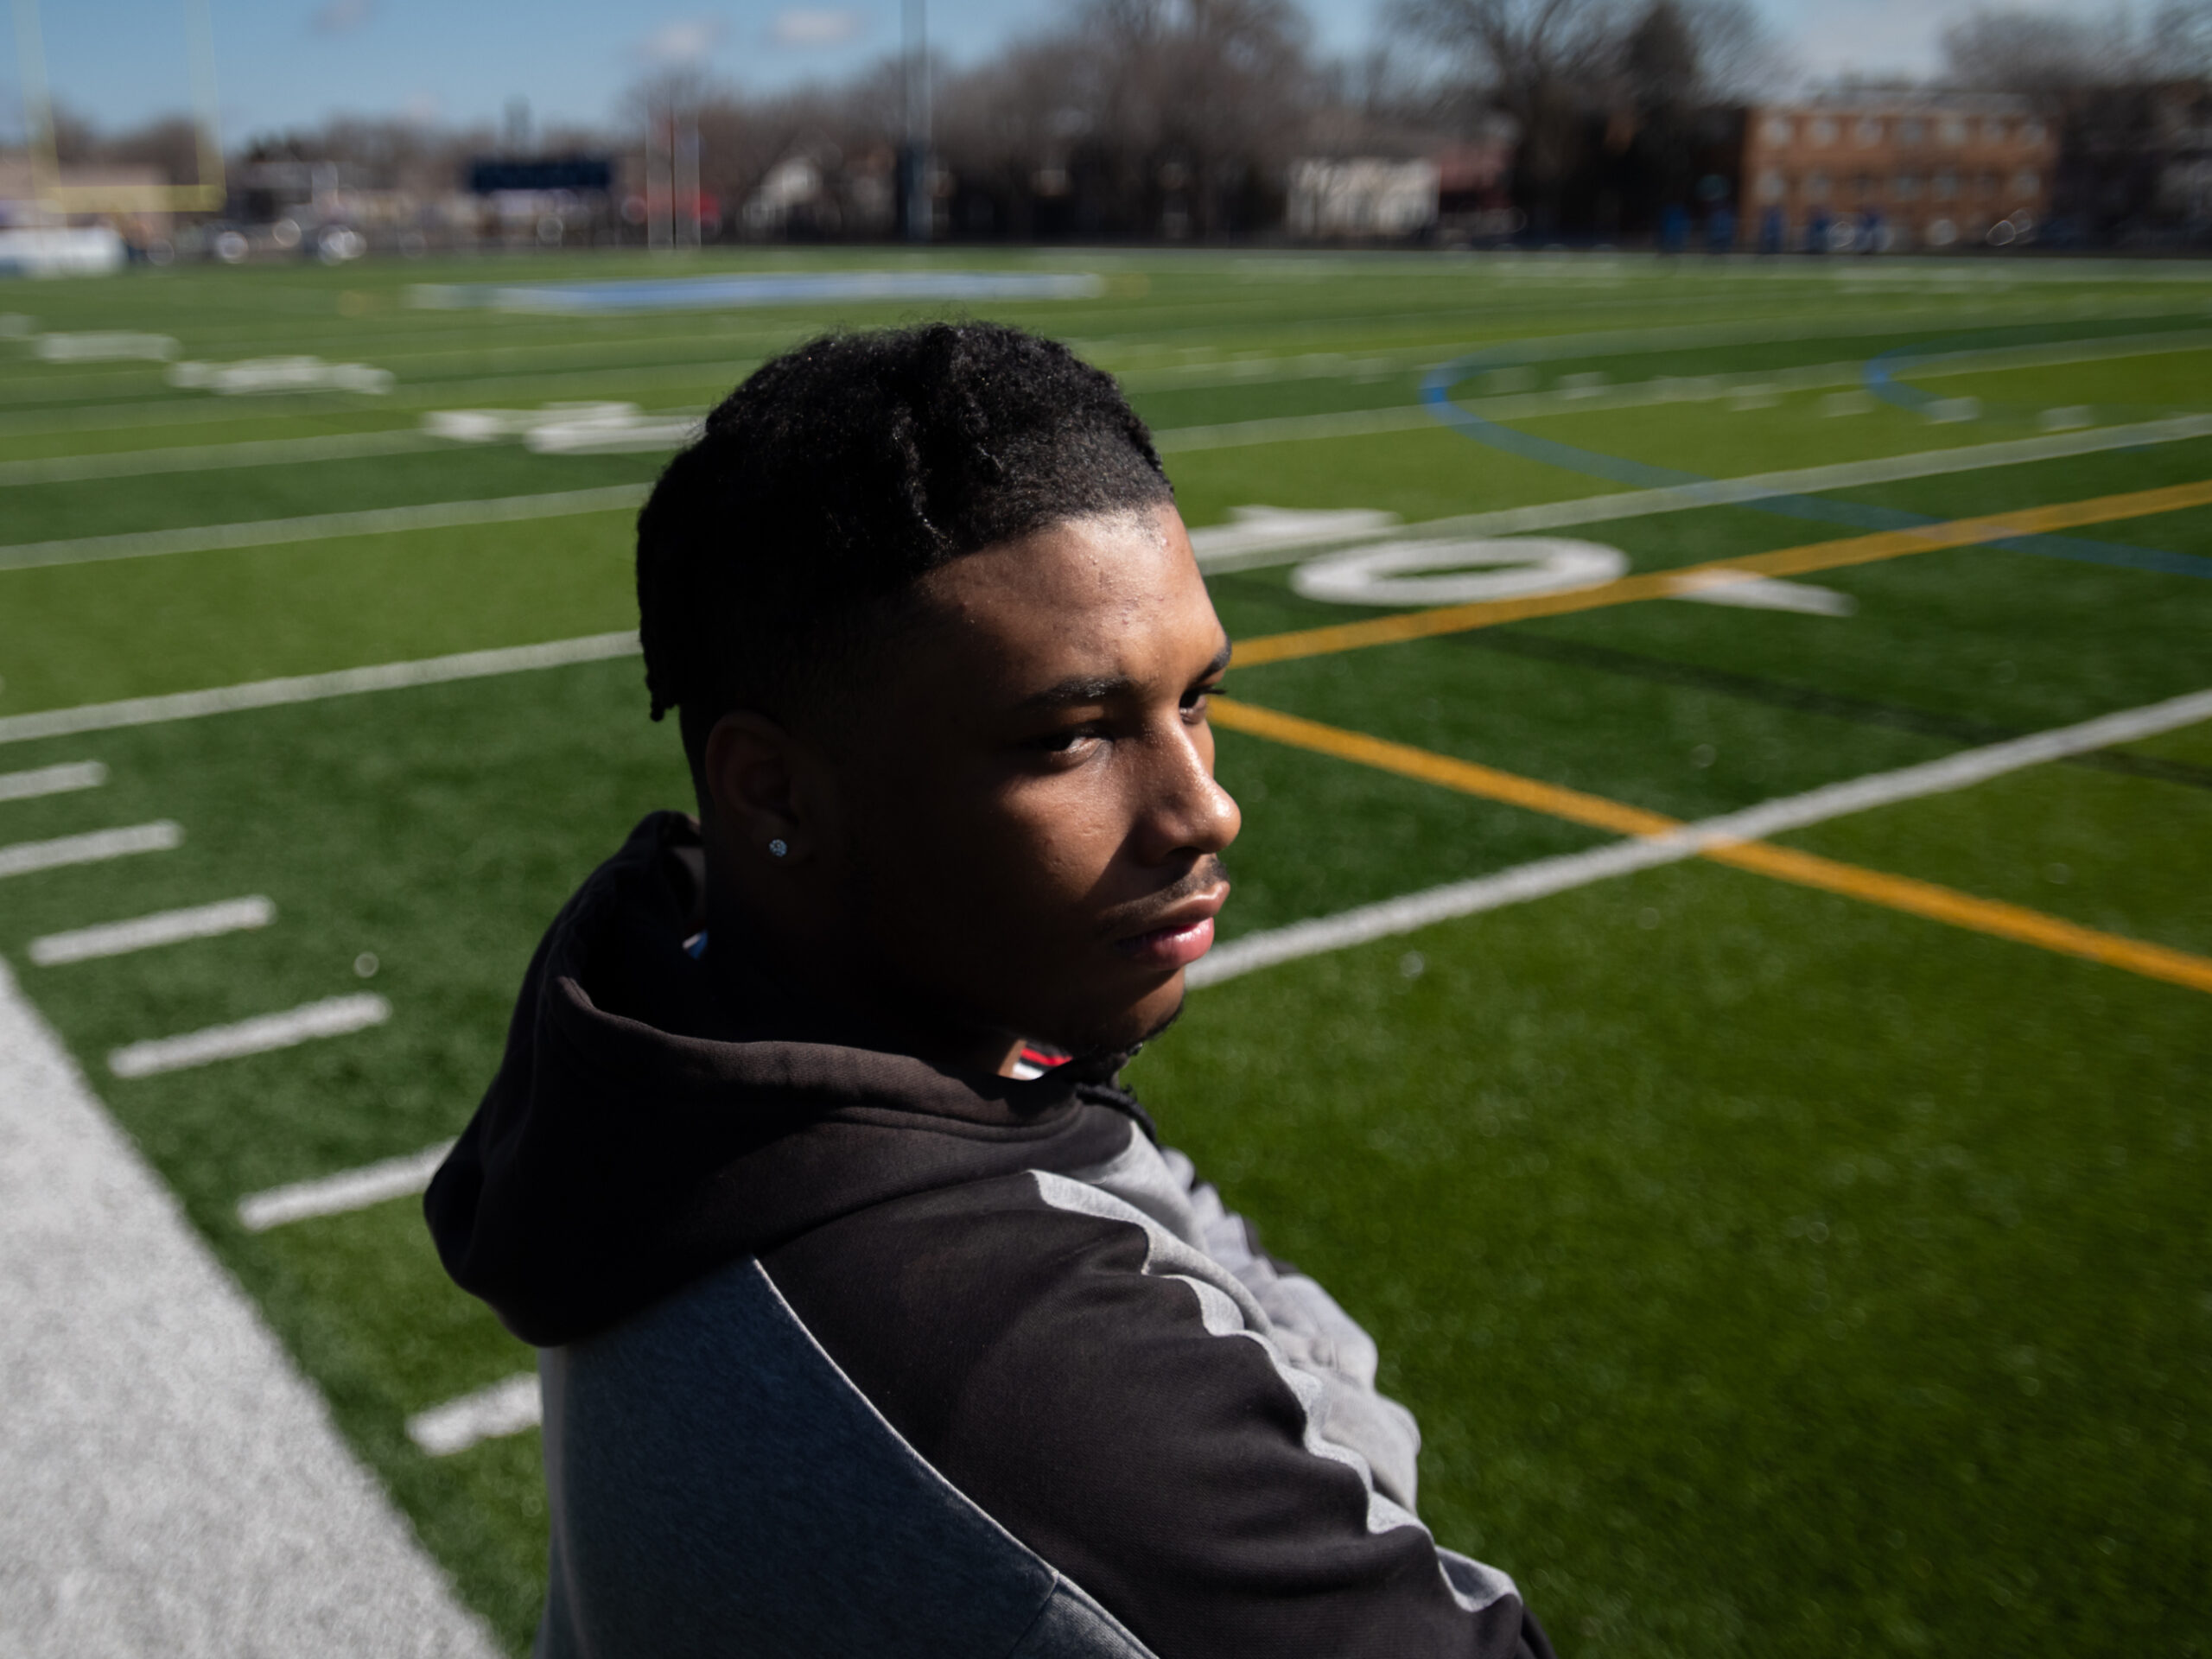 Kahlil Brown, 18, says teammate Deshaun Hill Jr., the student and quarterback who was shot and killed in 2022, was his best friend. Brown, shown posing for a portrait at the North Community High School football field in Minneapolis on April 9, will attend St. Olaf College in the fall.